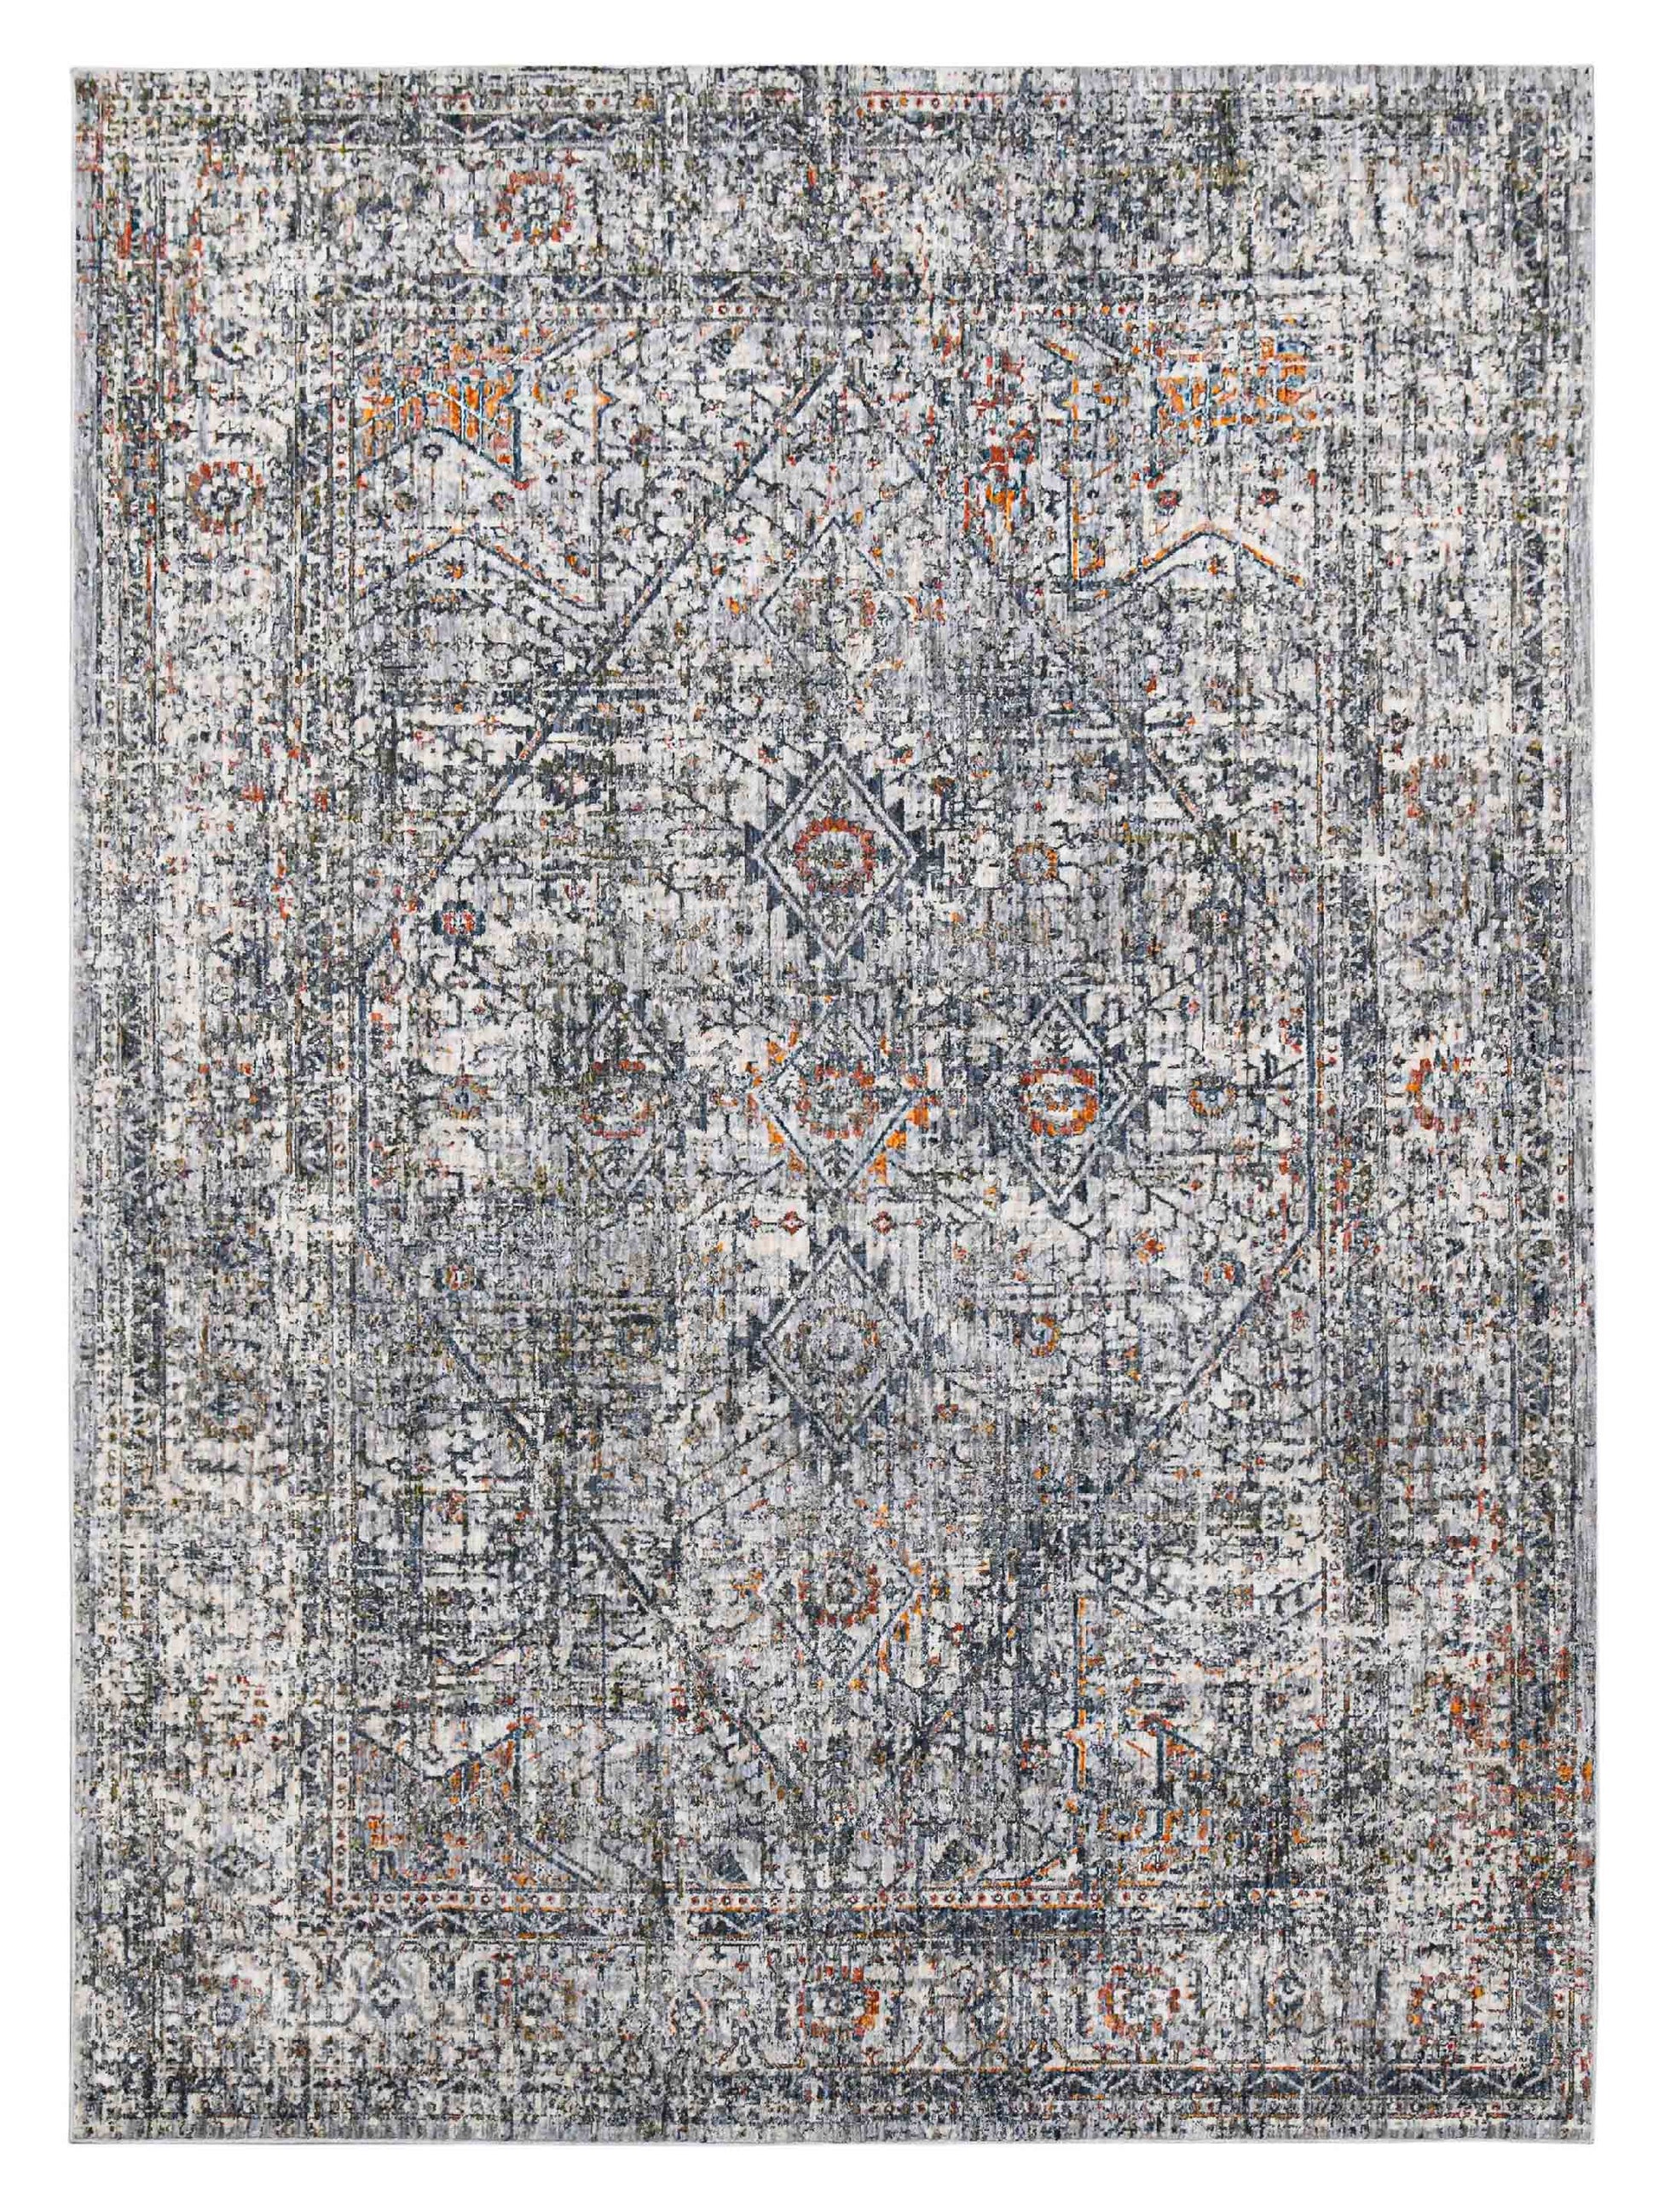 Limited Westonia WES-905 GRAY Transitional Machinemade Rug